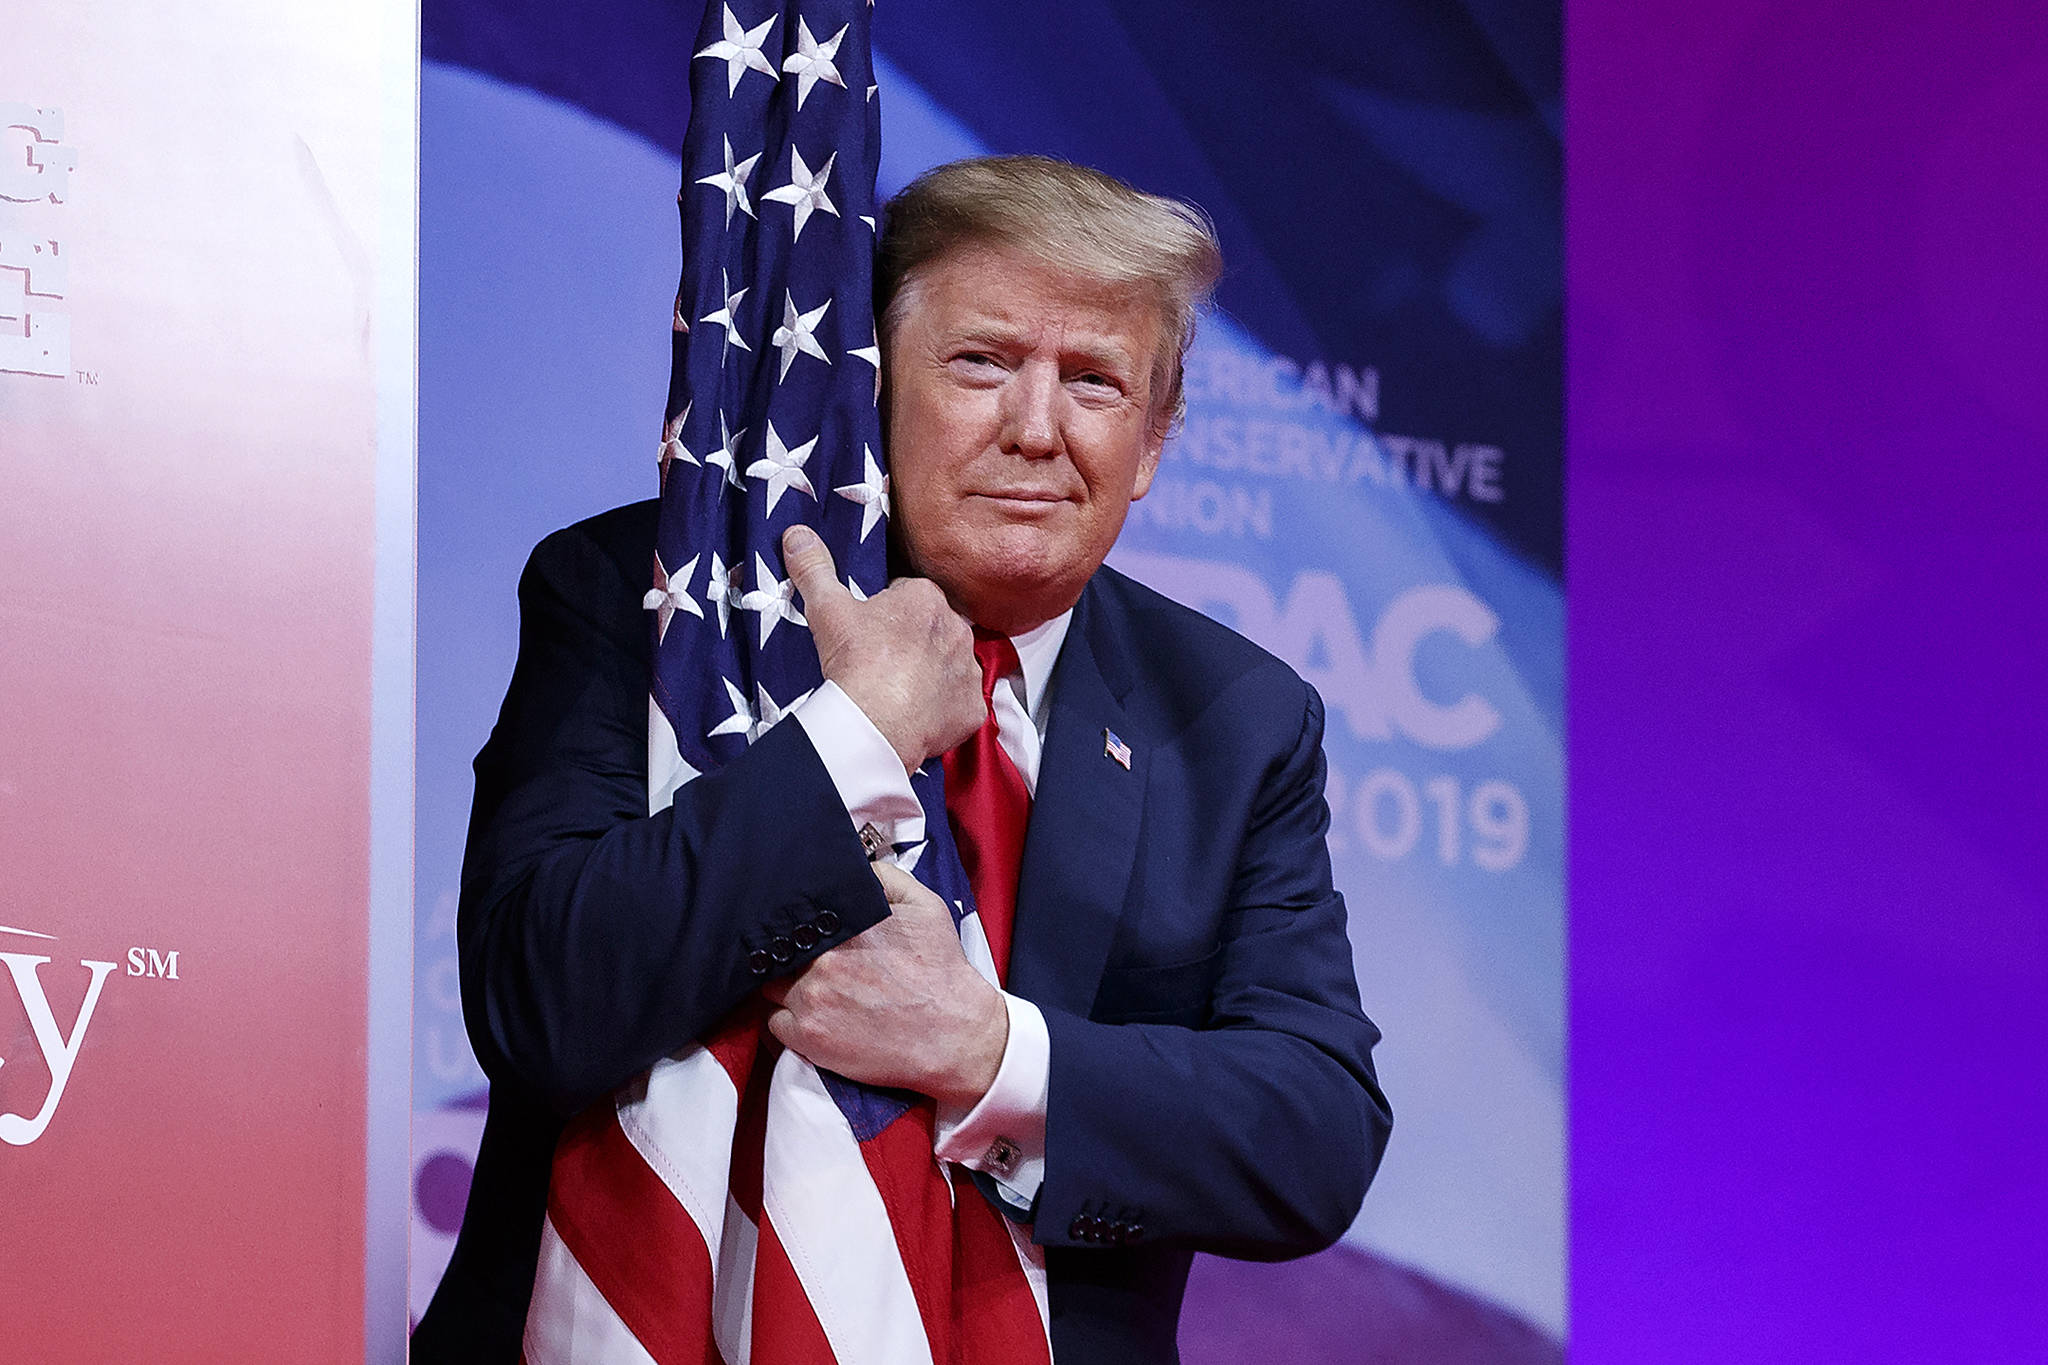 President Donald Trump hugs the American flag as he arrives to speak at Conservative Political Action Conference, CPAC 2019, in Oxon Hill, Md., Saturday, March 2, 2019. (AP Photo/Carolyn Kaster)